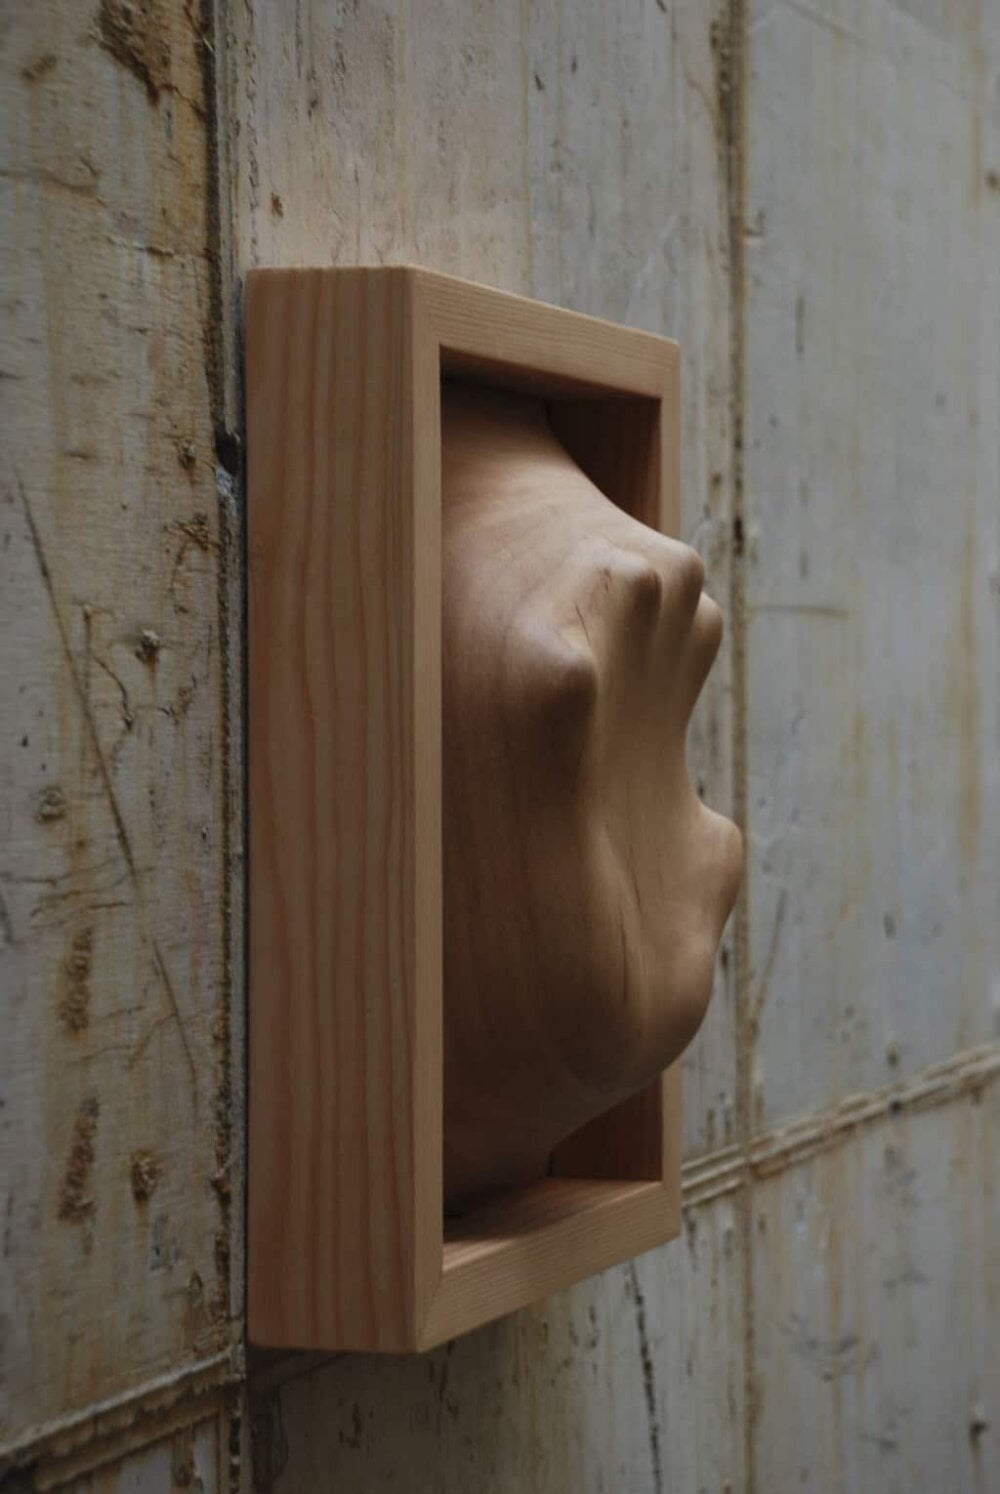 Amazing Carved Wood Sculptures That Look Like People And Objects Are Trapped Inside By Tung Ming Chin 1